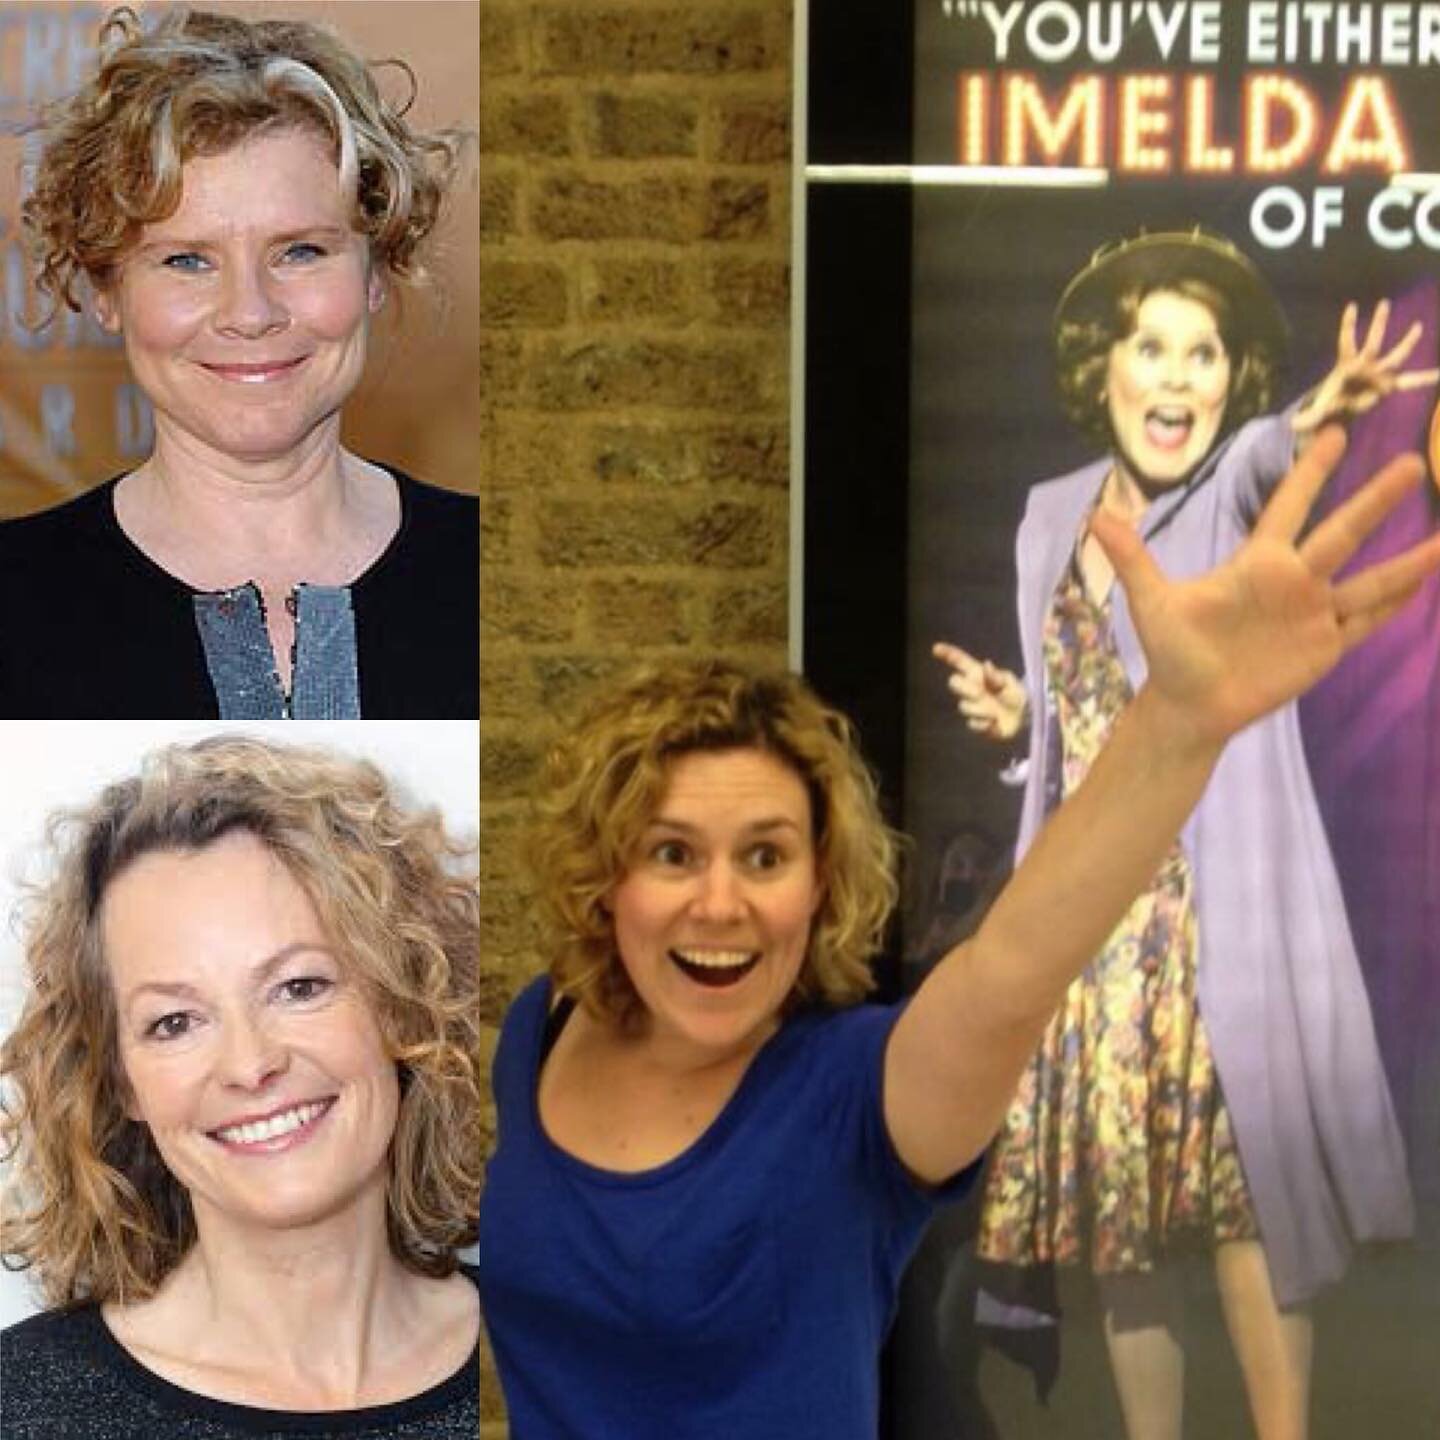 So...there have been a few comments about my likeness to a couple of distinguished well known faces. I feel it is time to reveal that I am indeed the love child of #imeldastaunton and @kmhumble or as I like to call them &lsquo;Immimum and Hummy&rsquo